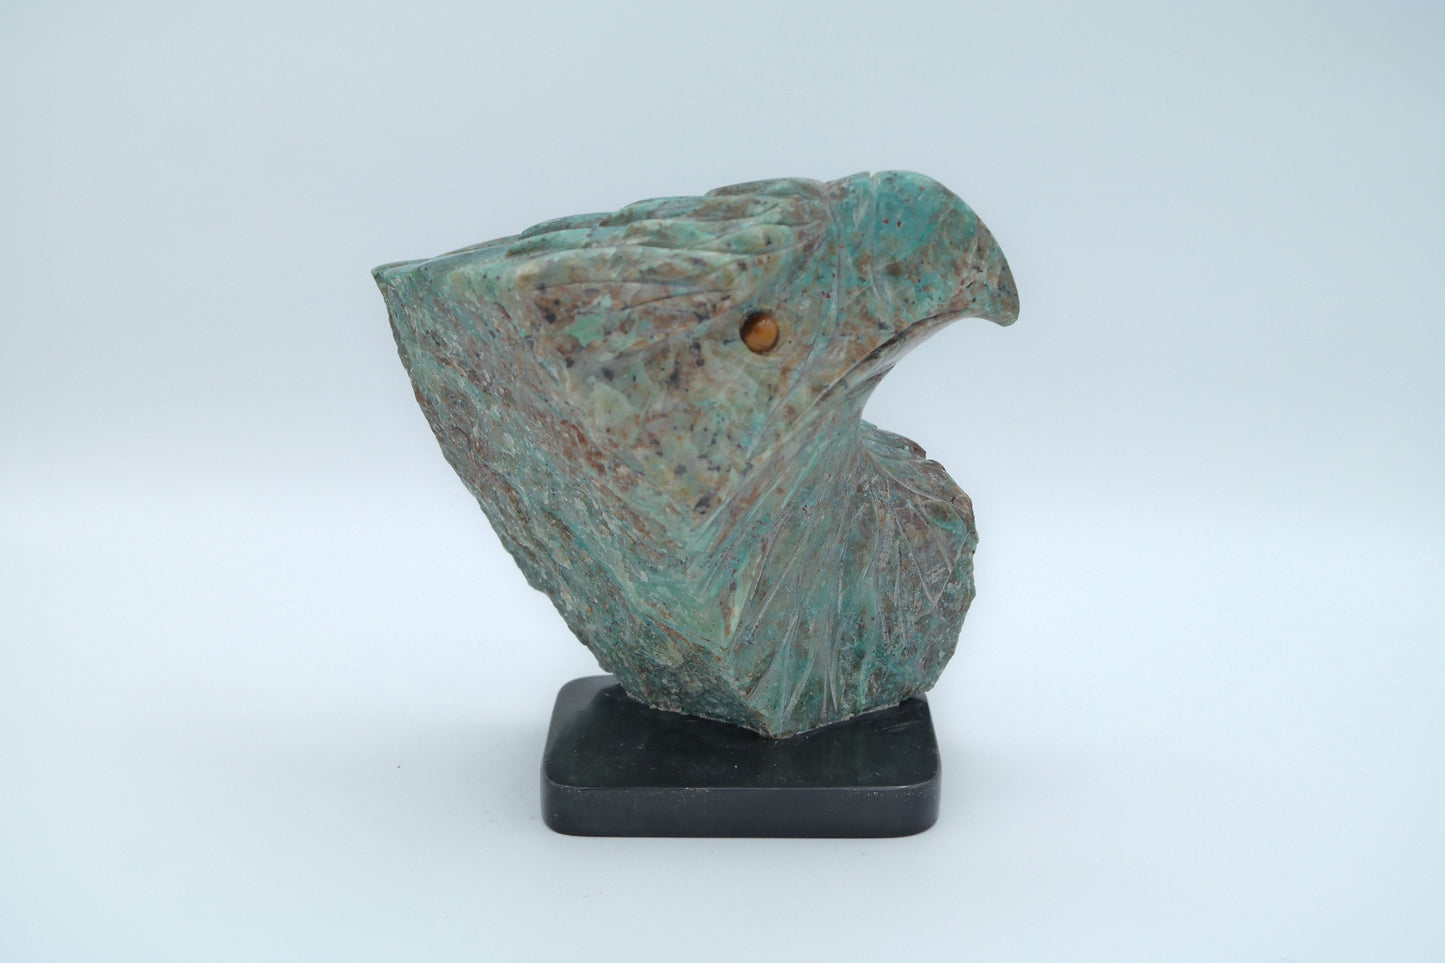 Eagle head carving made of Turquoise and Chrysocolla